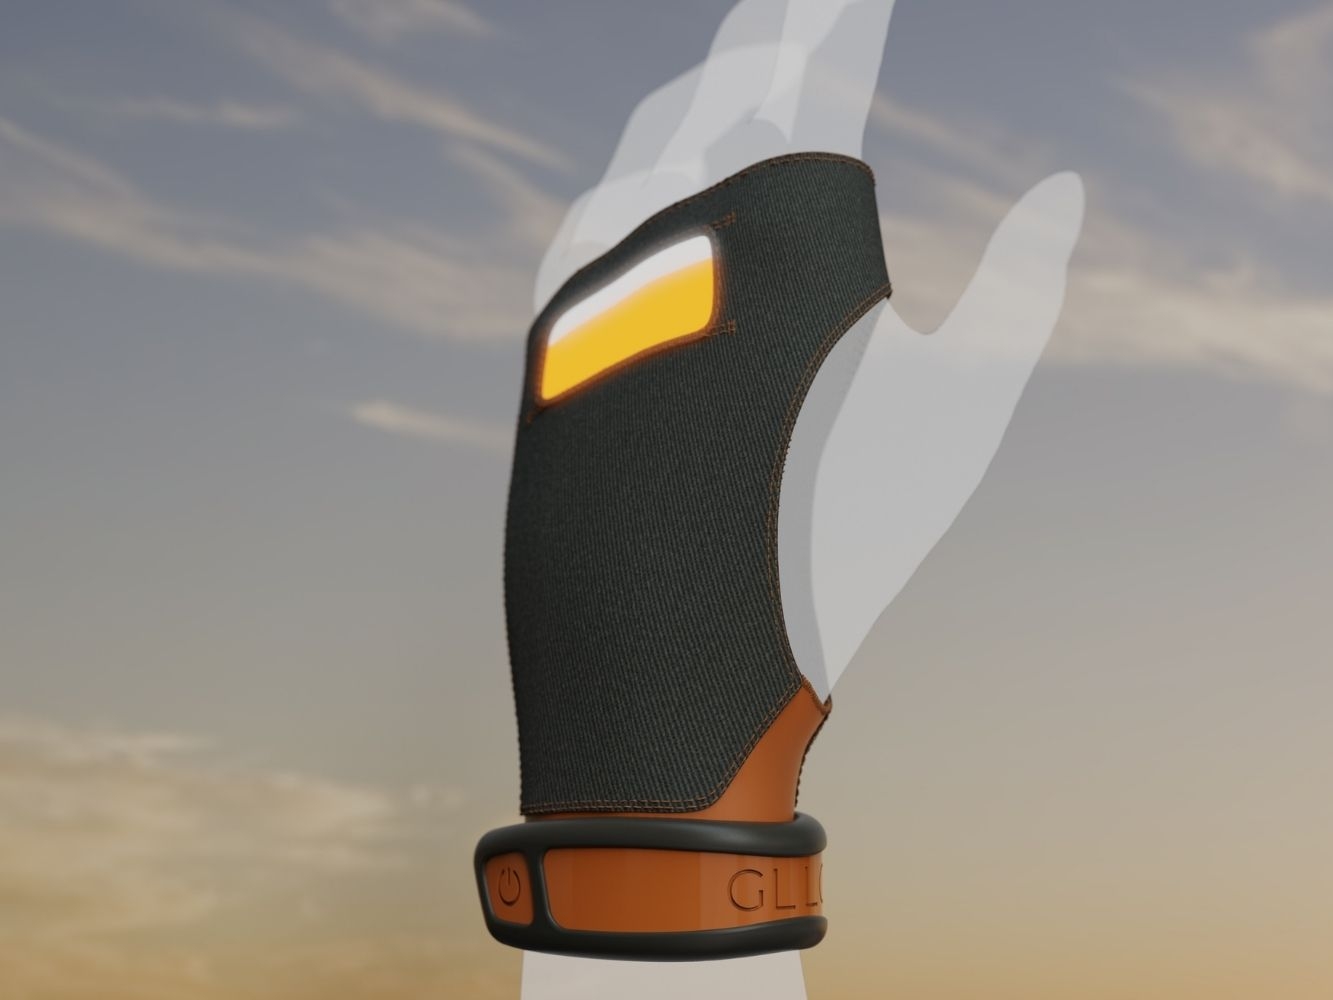 Graphic design rendering of an open water swimming safety device worn as an orange and grey glove